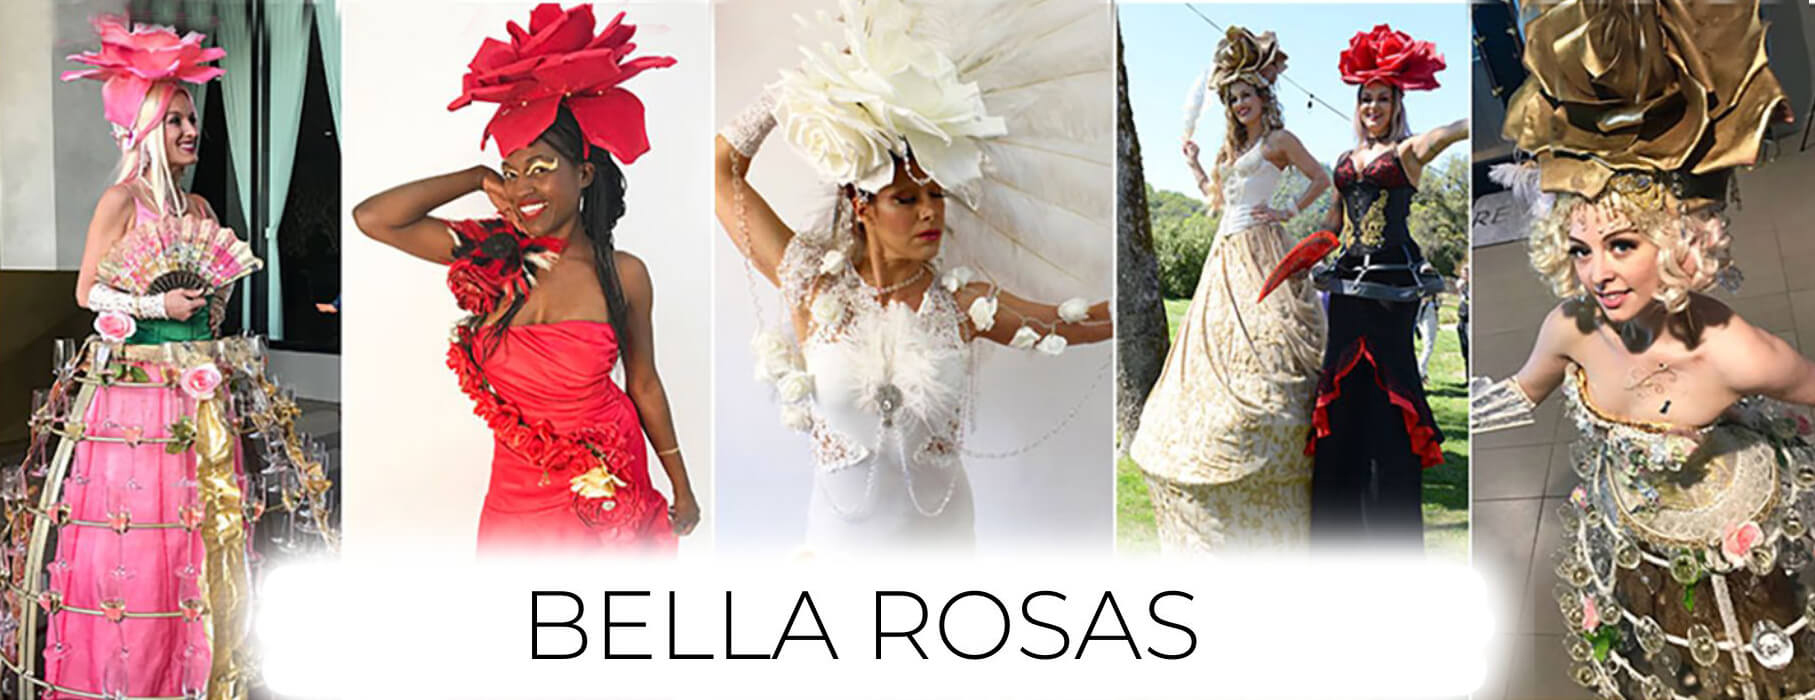 Bella Rosa Rose inspired costumed characters unique to Catalyst Arts Entertainment in San Francisco & wine country